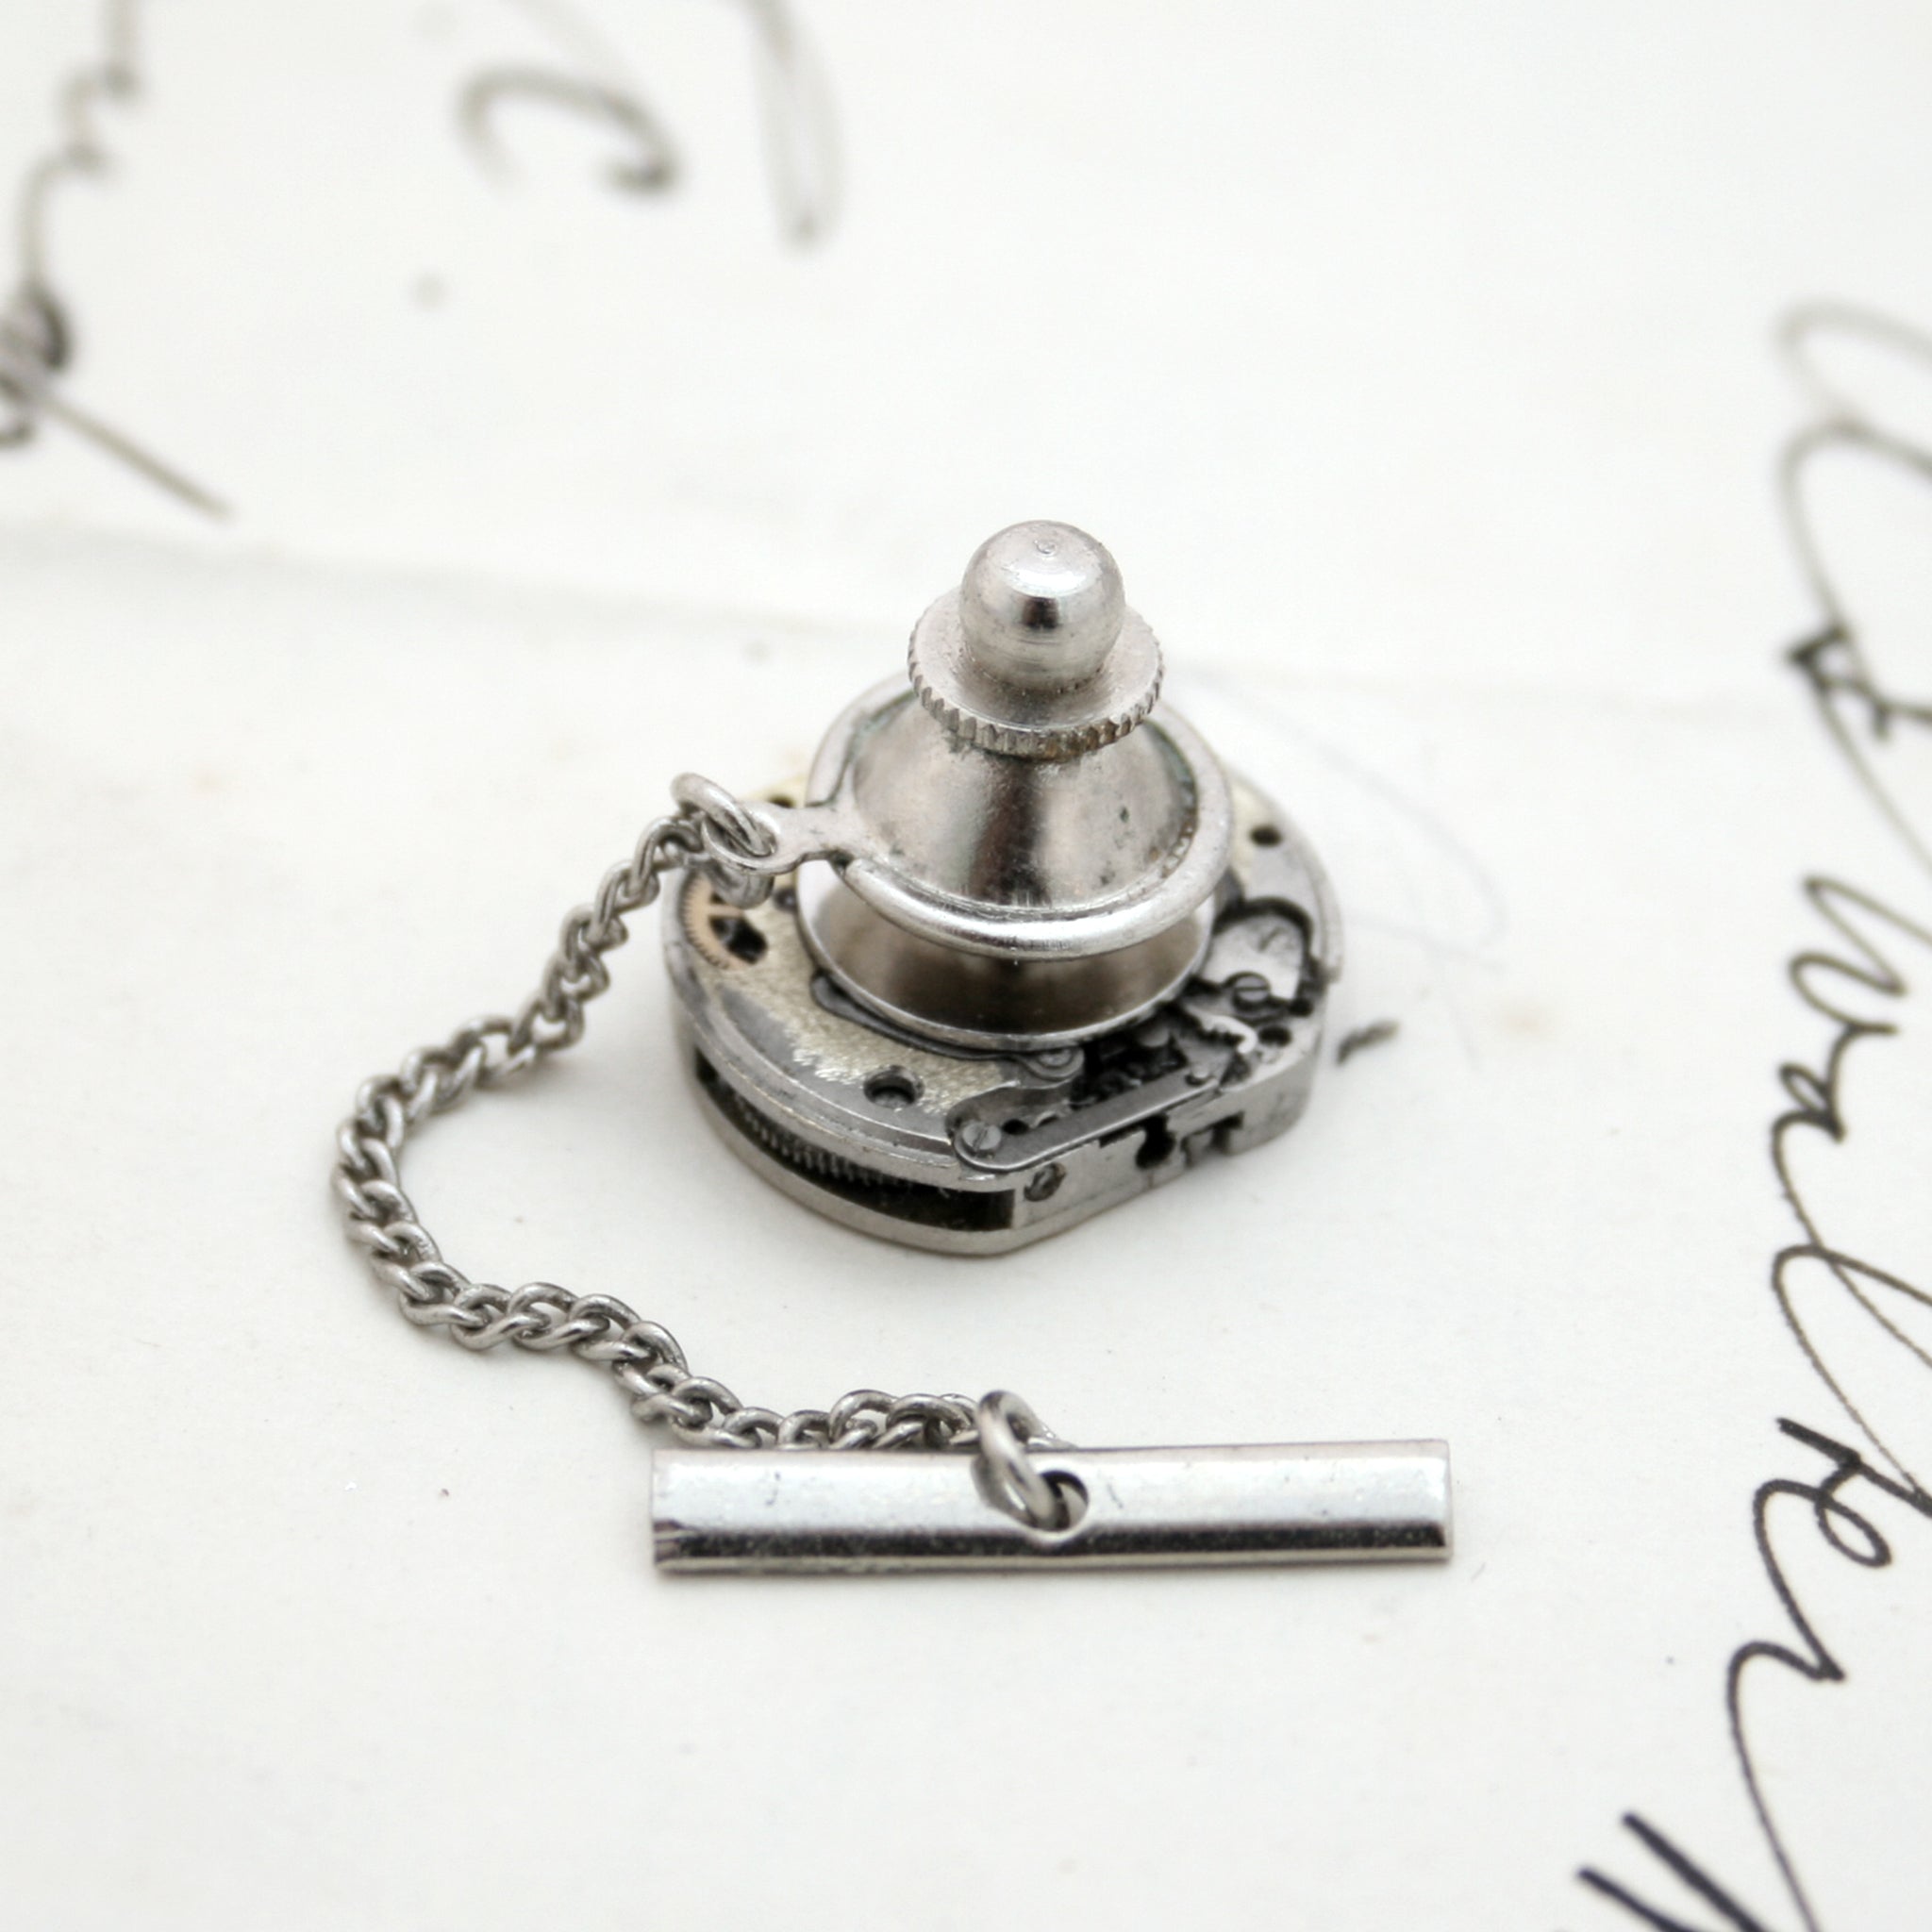 Back of the Steampunk Tie Tack with chain